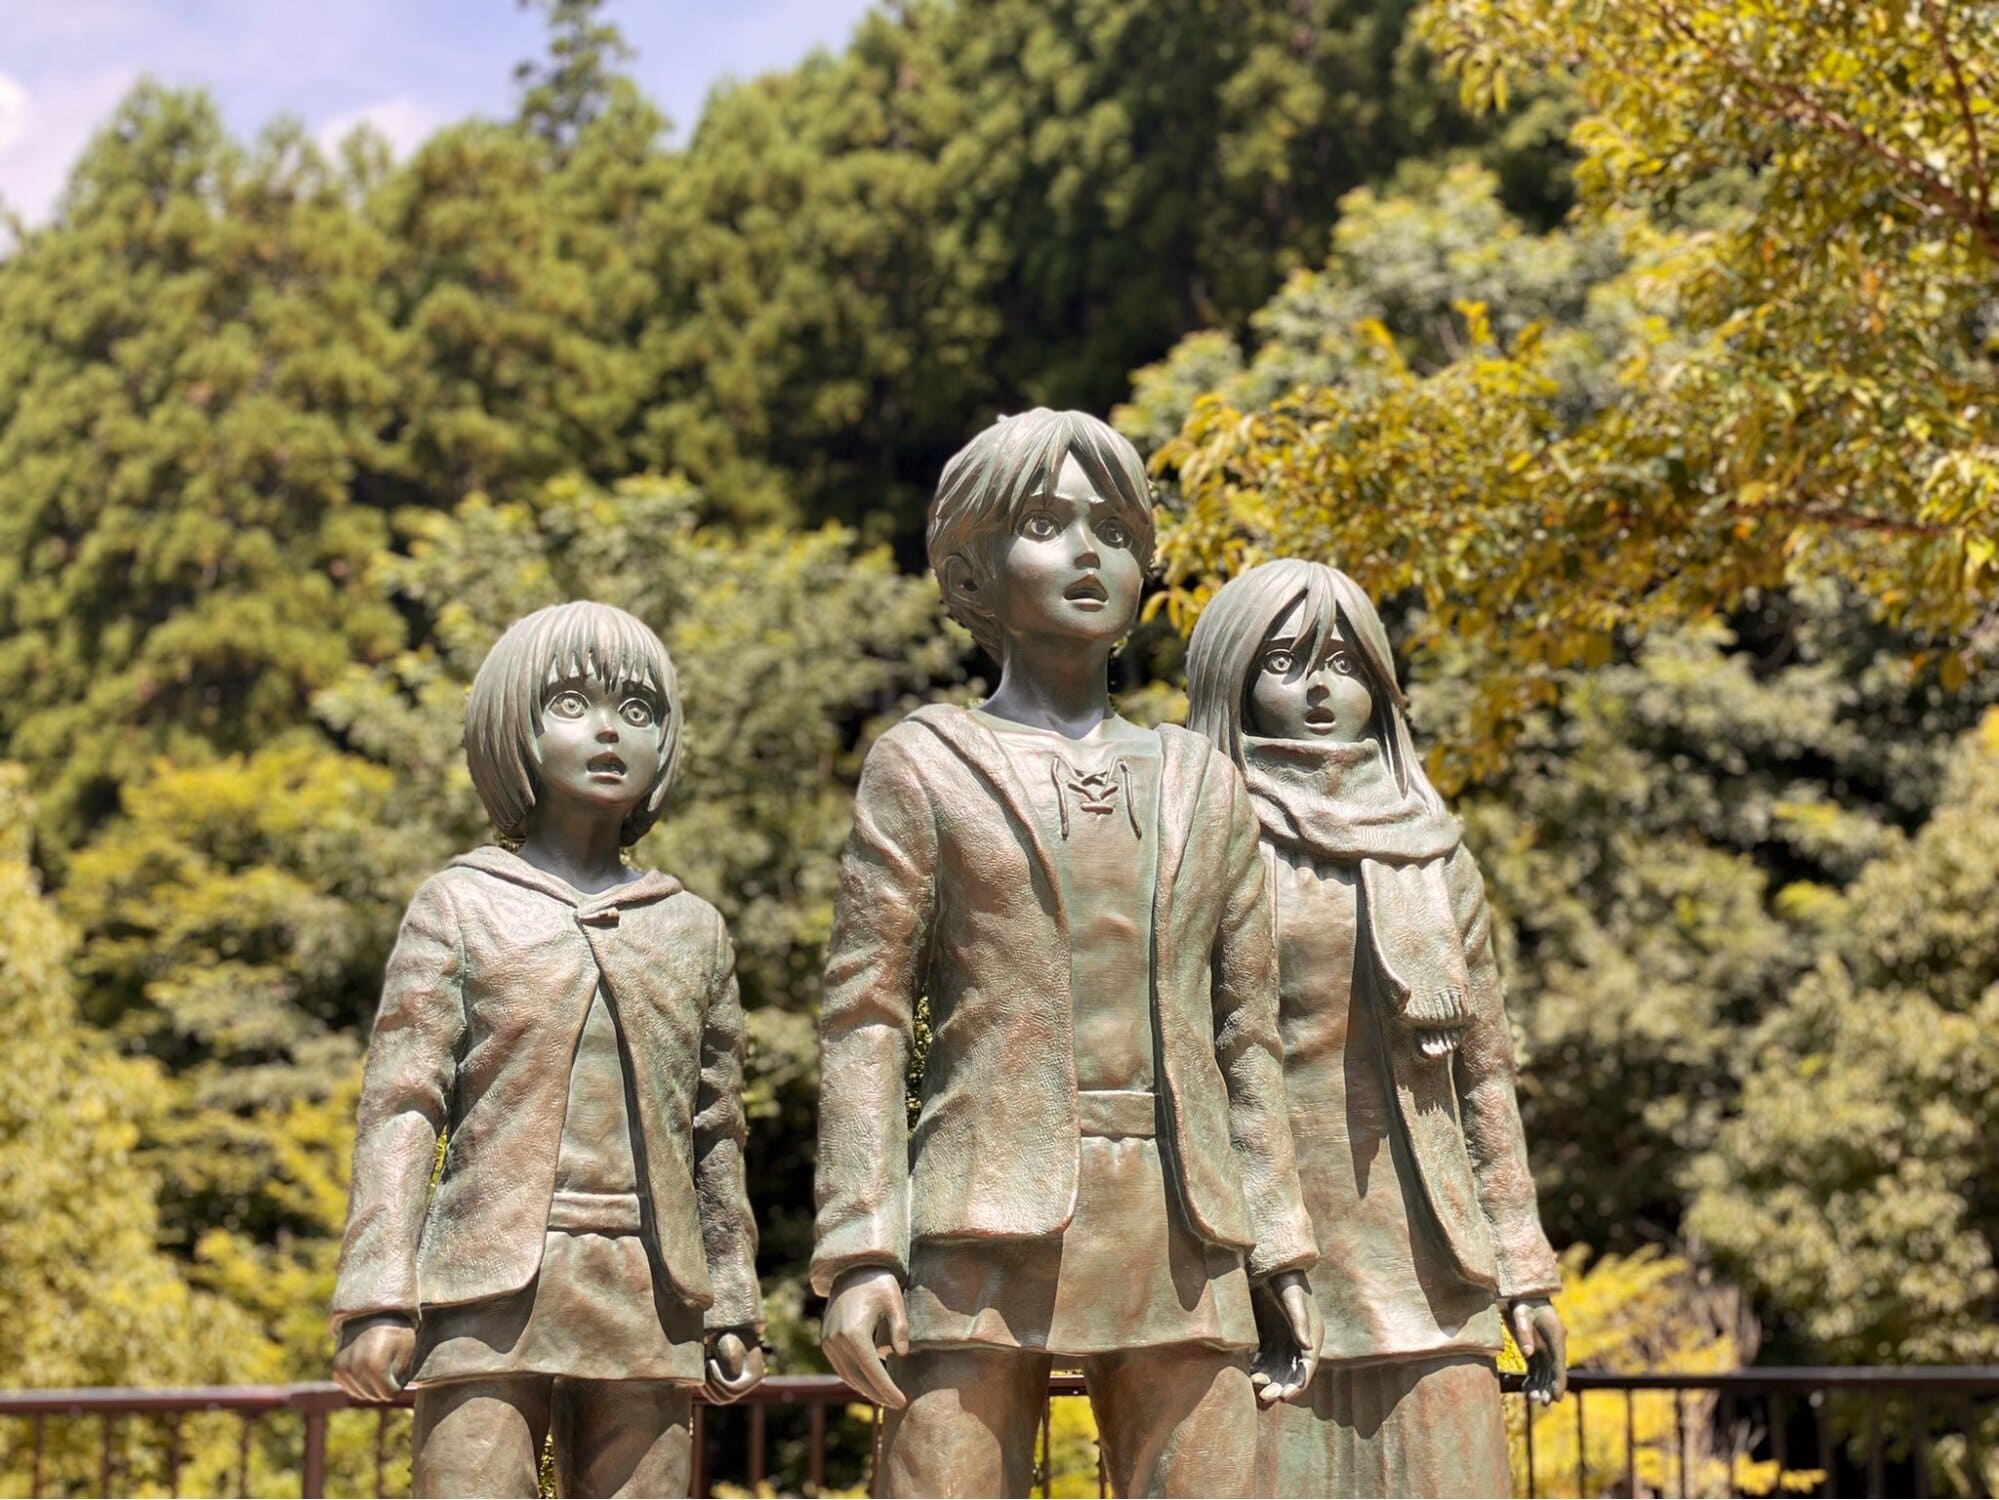 Attack on Titan in real life - statue of armin, eren, and mikasa